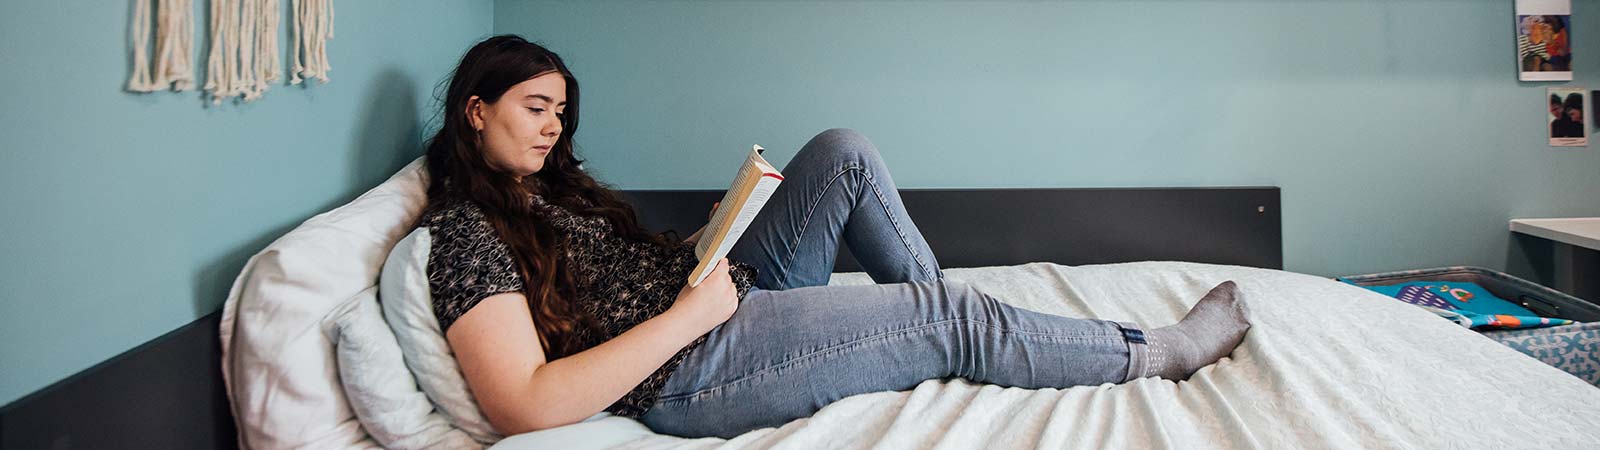 Female student reading on her bed